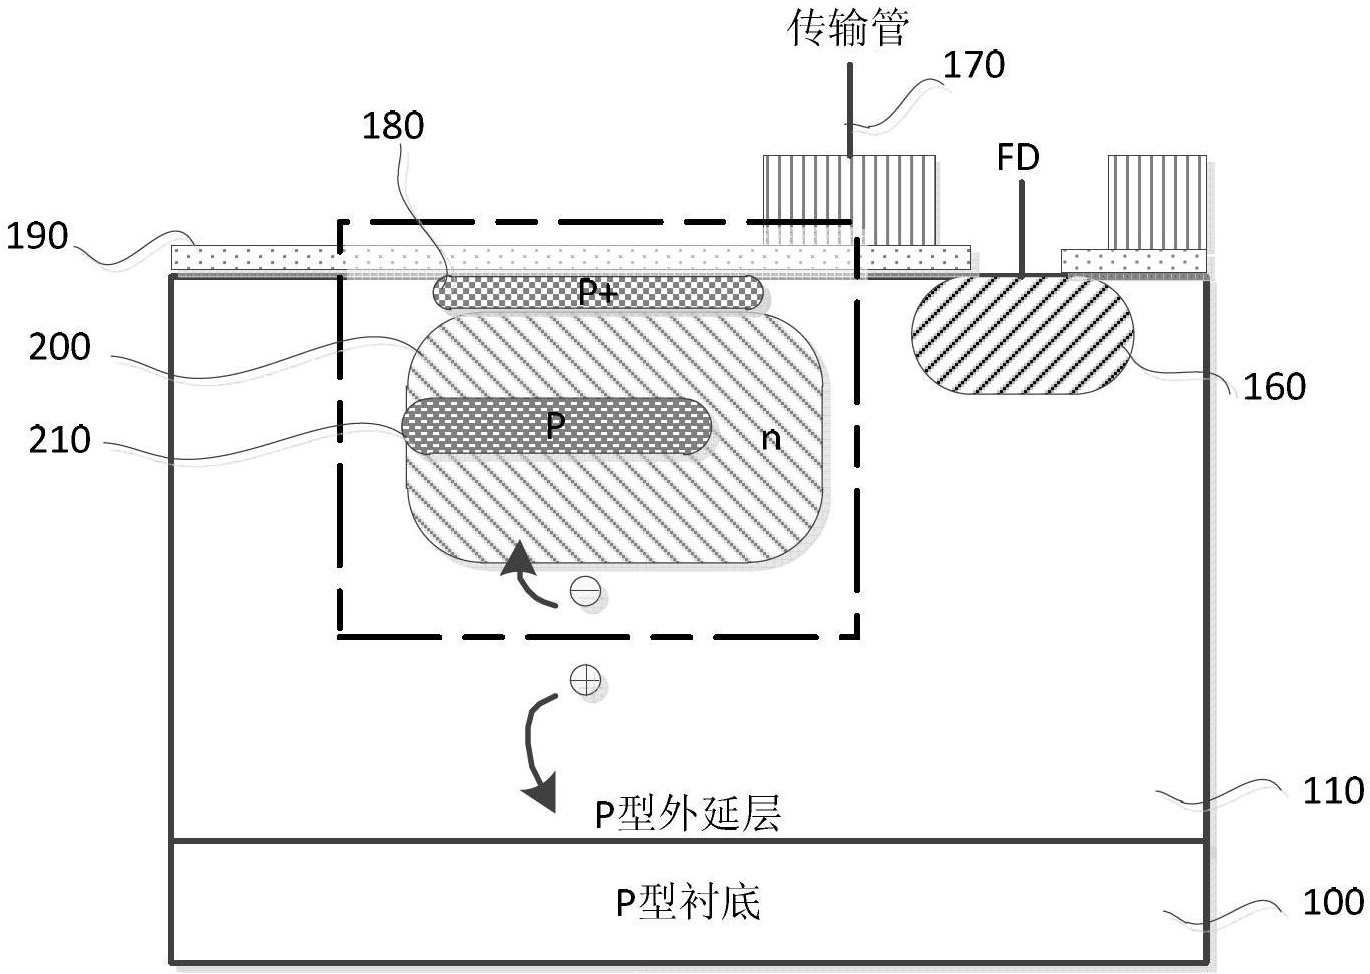 Small-size CMOS image sensor pixel structure and generation method thereof